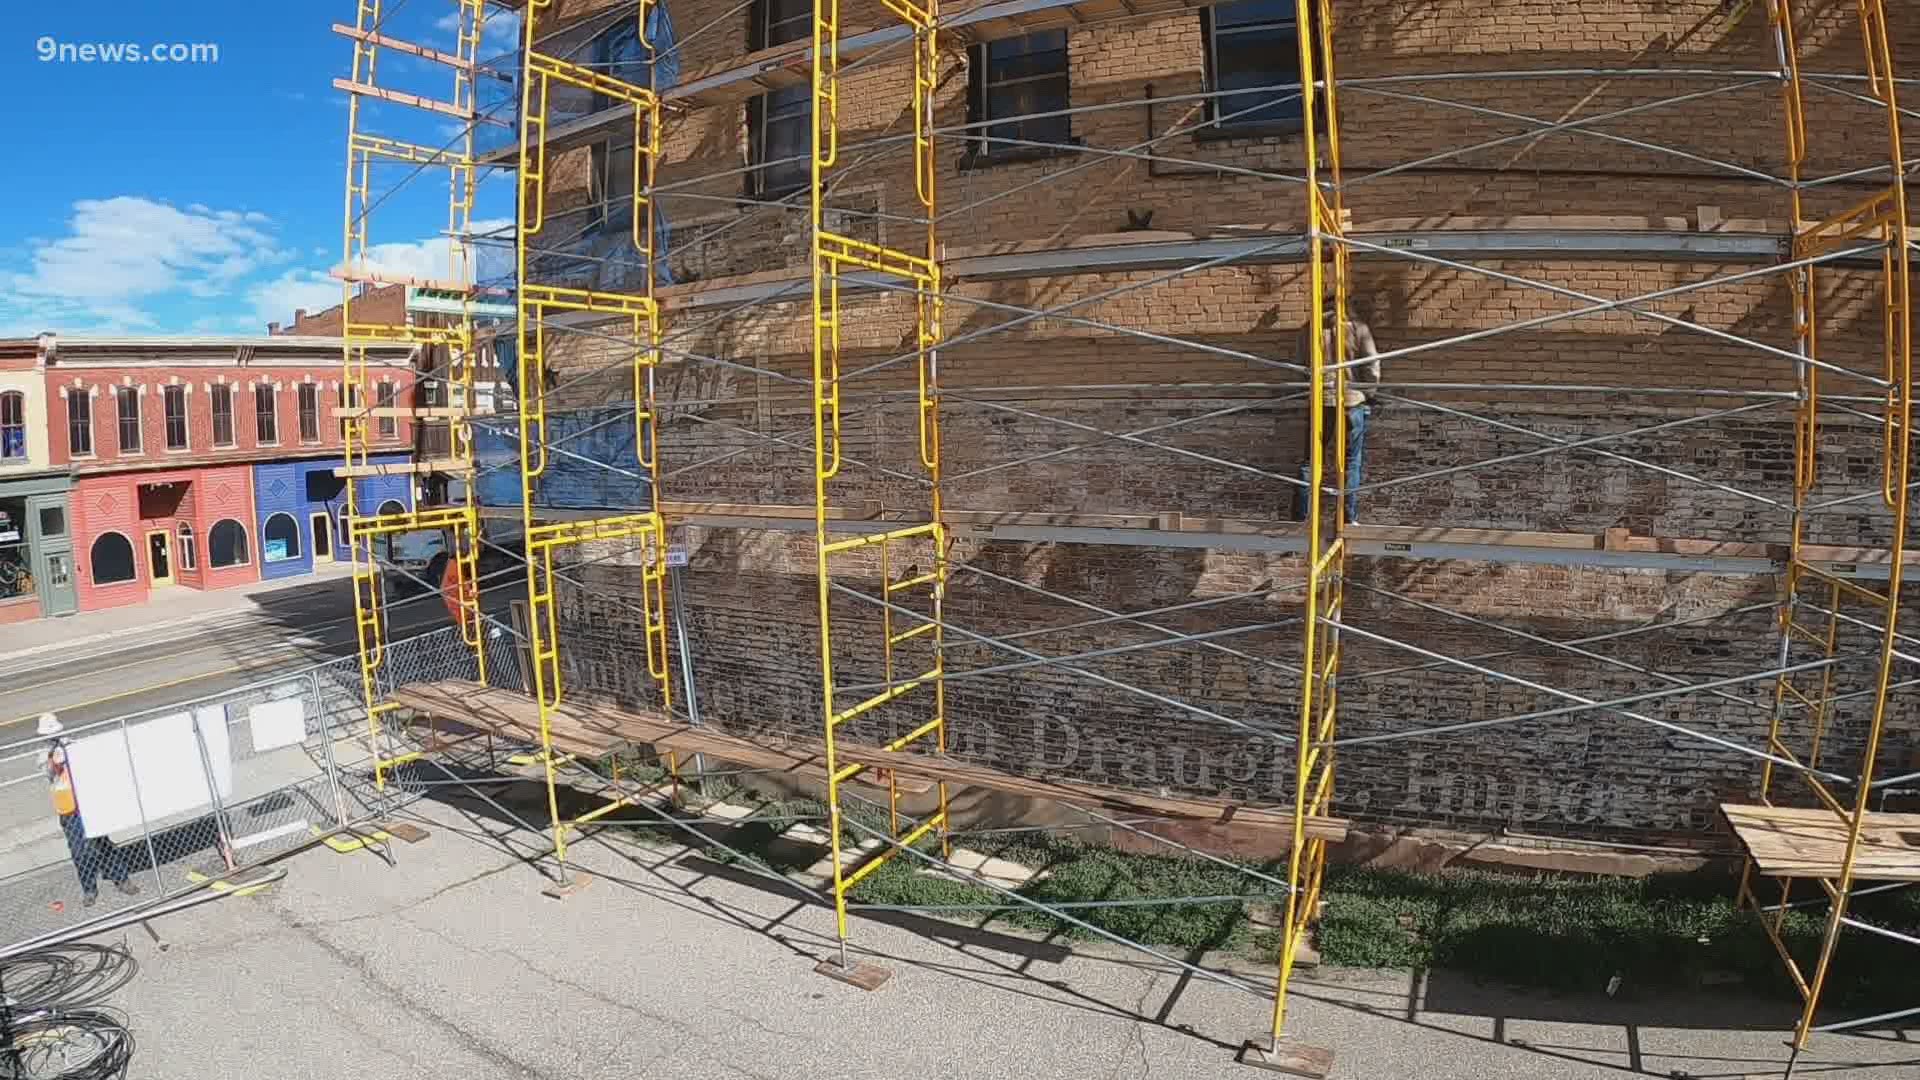 Work is underway on the Tabor Opera House in Leadville, Colorado to restore the 140-year-old building.